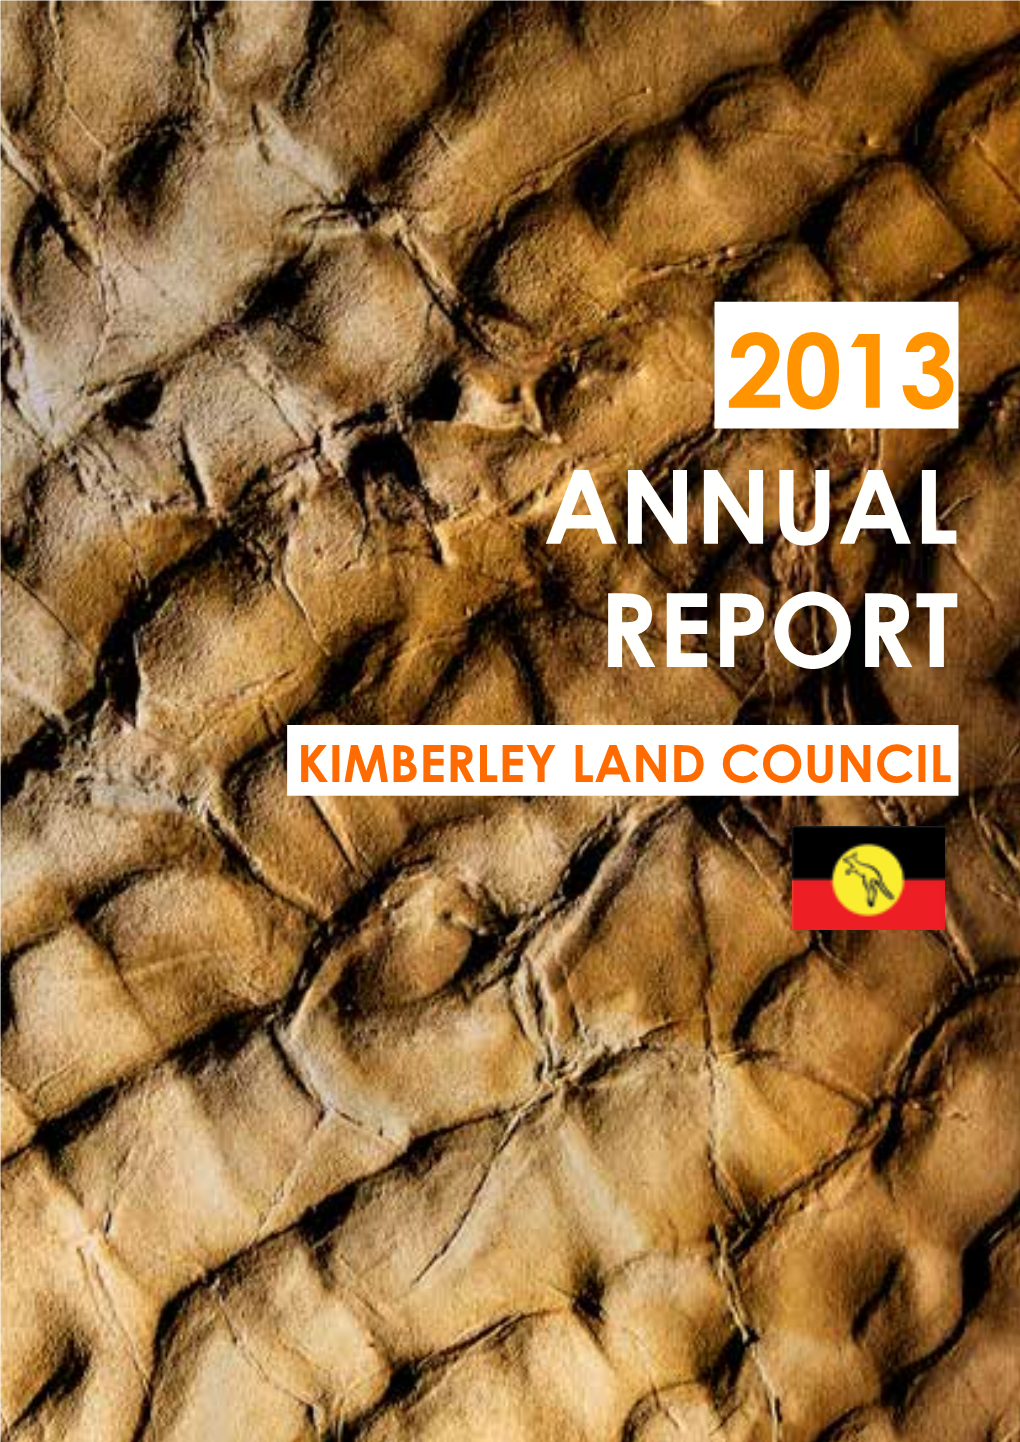 2013 Annual Report Kimberley Land Council